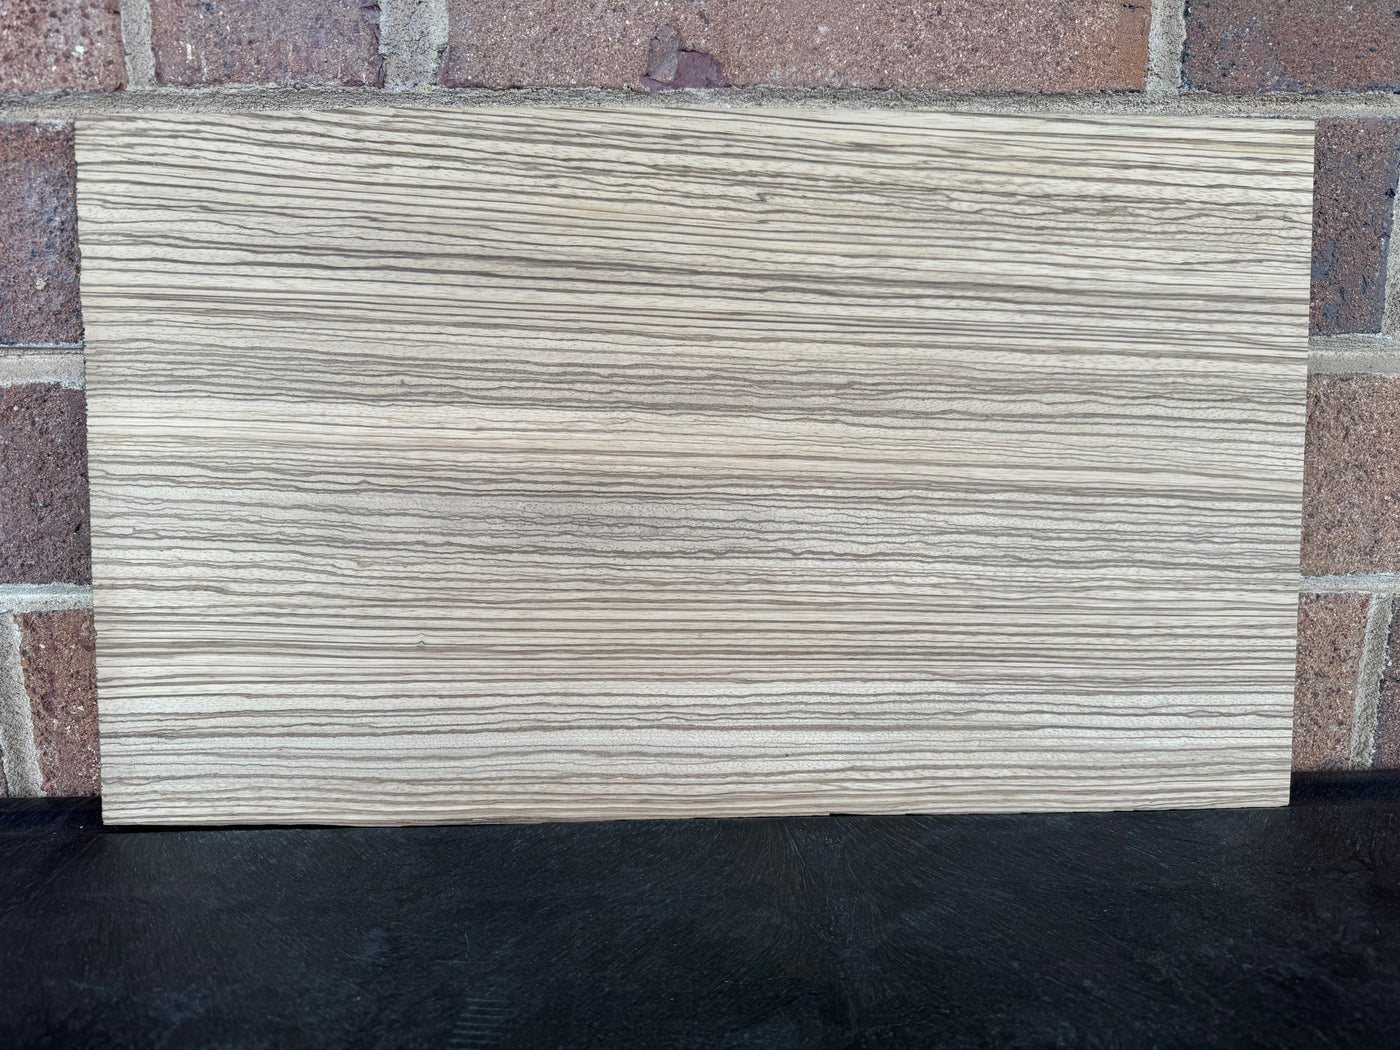 Zebrawood TimberThins® 11 mm thick.  Sanded